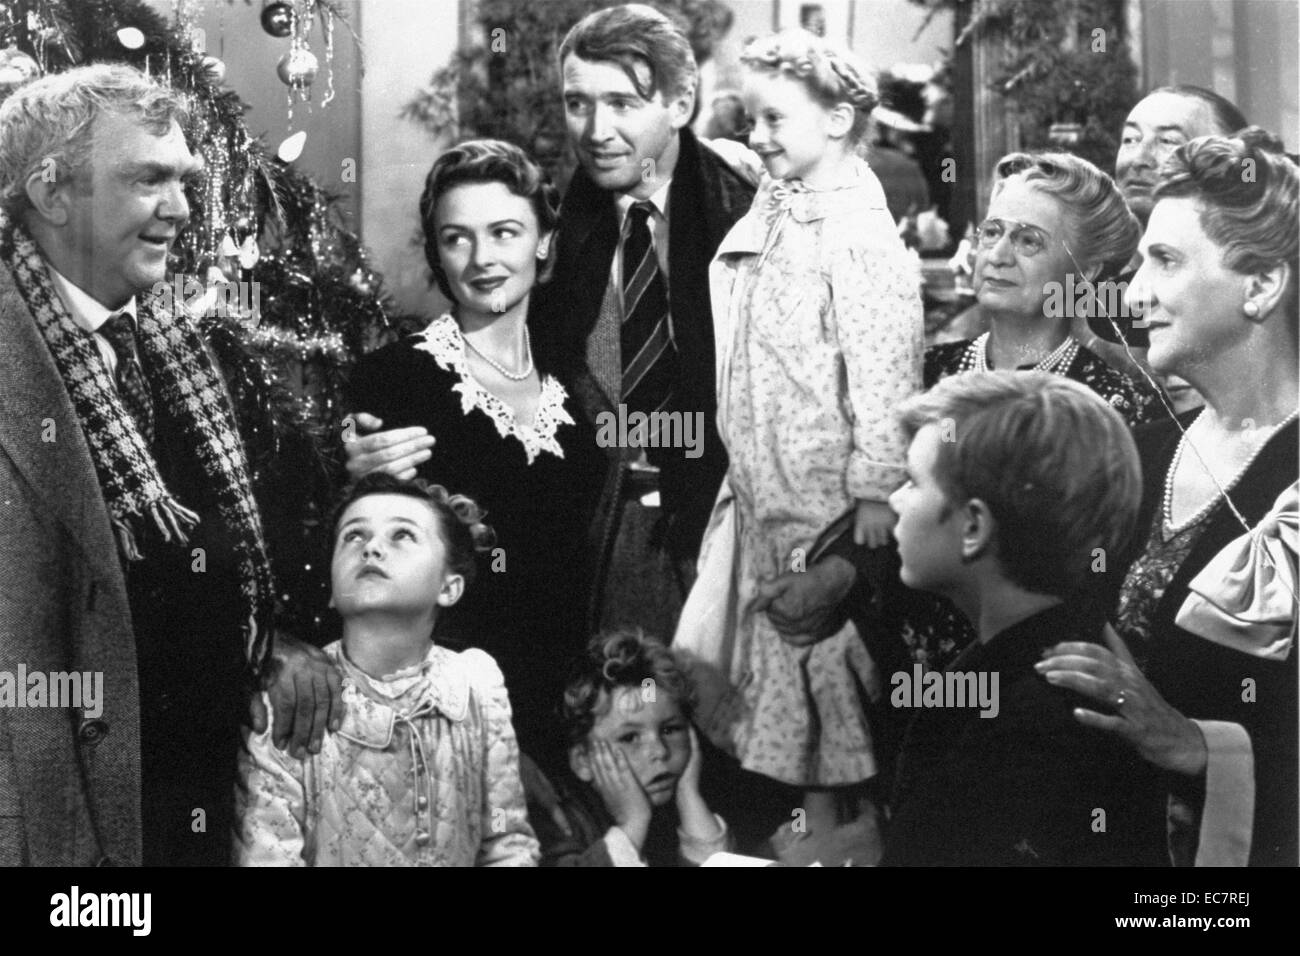 It's a Wonderful Life is a 1946 American Christmas fantasy comedy-drama film produced and directed by Frank Capra, based on the short story 'The Greatest Gift', written by Philip Van Doren Stern. The film is considered one of the most loved films in American cinema and has become traditional viewing during the Christmas season. Starring James Stewart and Donna Reed. Stock Photo